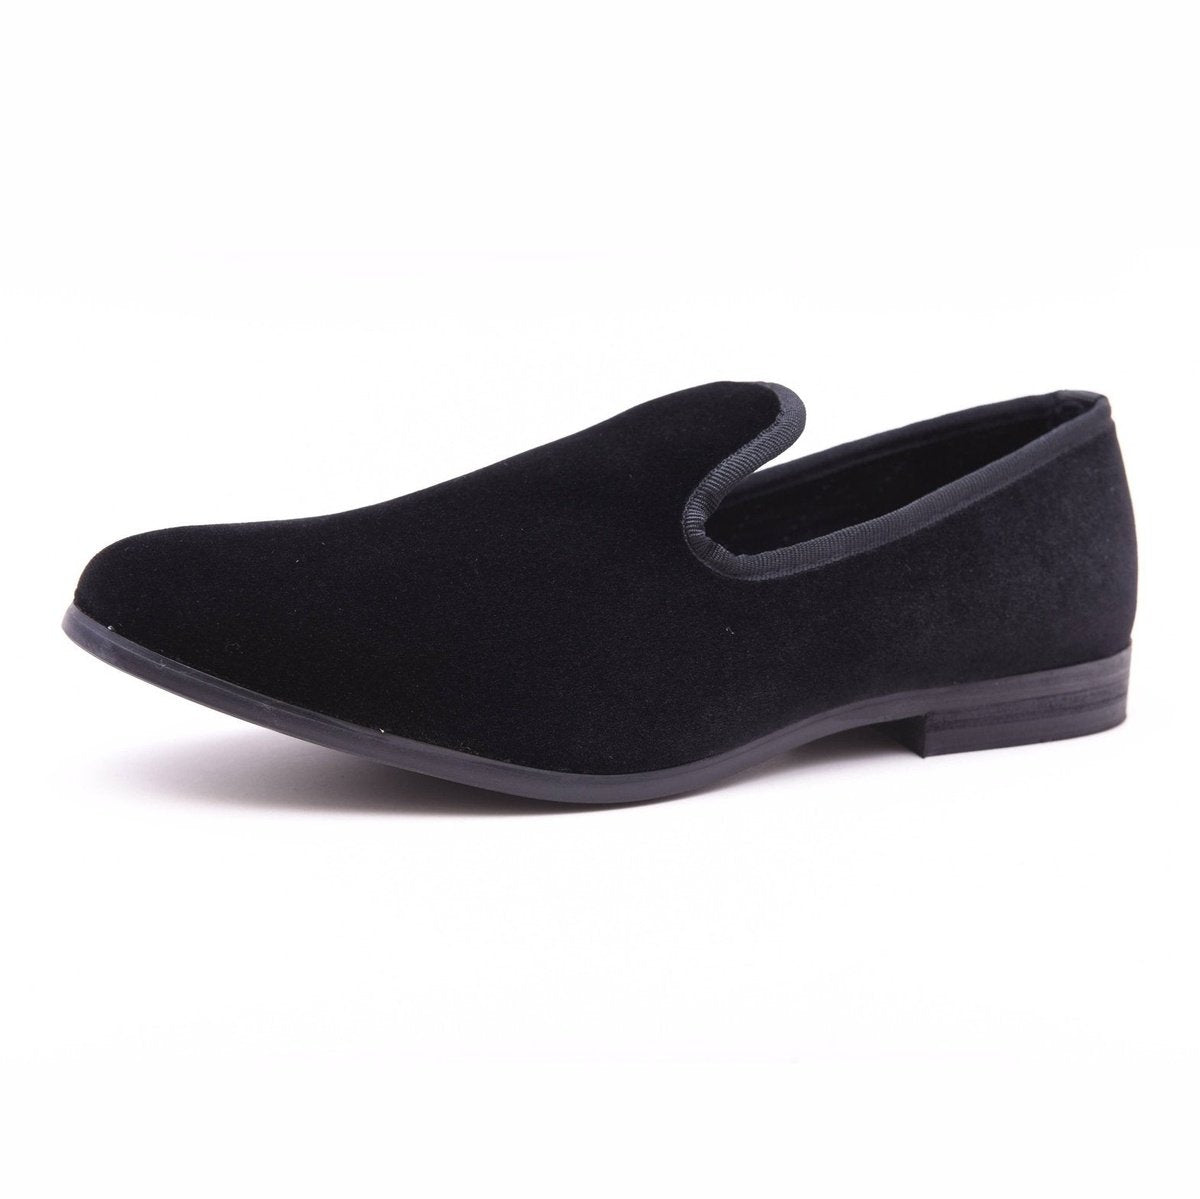 The Lapel Project The Lapel Project Black Velvet Loafer Prom Wedding Slip On Mens Dress Shoes